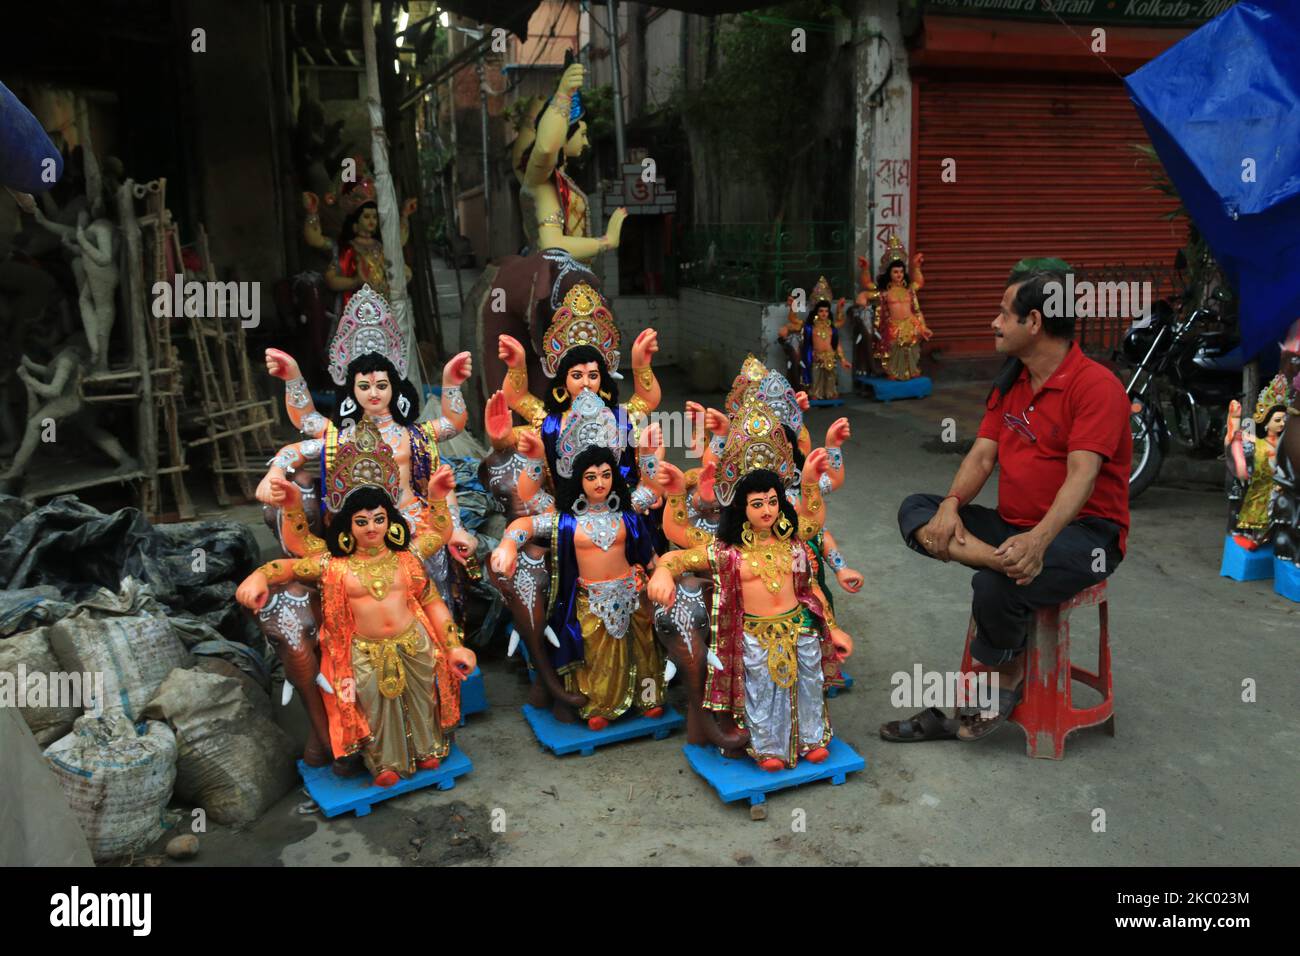 A idol seller waiting for customer in Kolkata, India, Wednesday, Sept. 16, 2020. Hindu festival Vishwakarma Puja will be celebrated on Thursday.India's total of coronavirus infections passed 5 million Wednesday, still soaring and testing the feeble health care system in tens of thousands of impoverished towns and villages. (Photo by Debajyoti Chakraborty/NurPhoto) Stock Photo